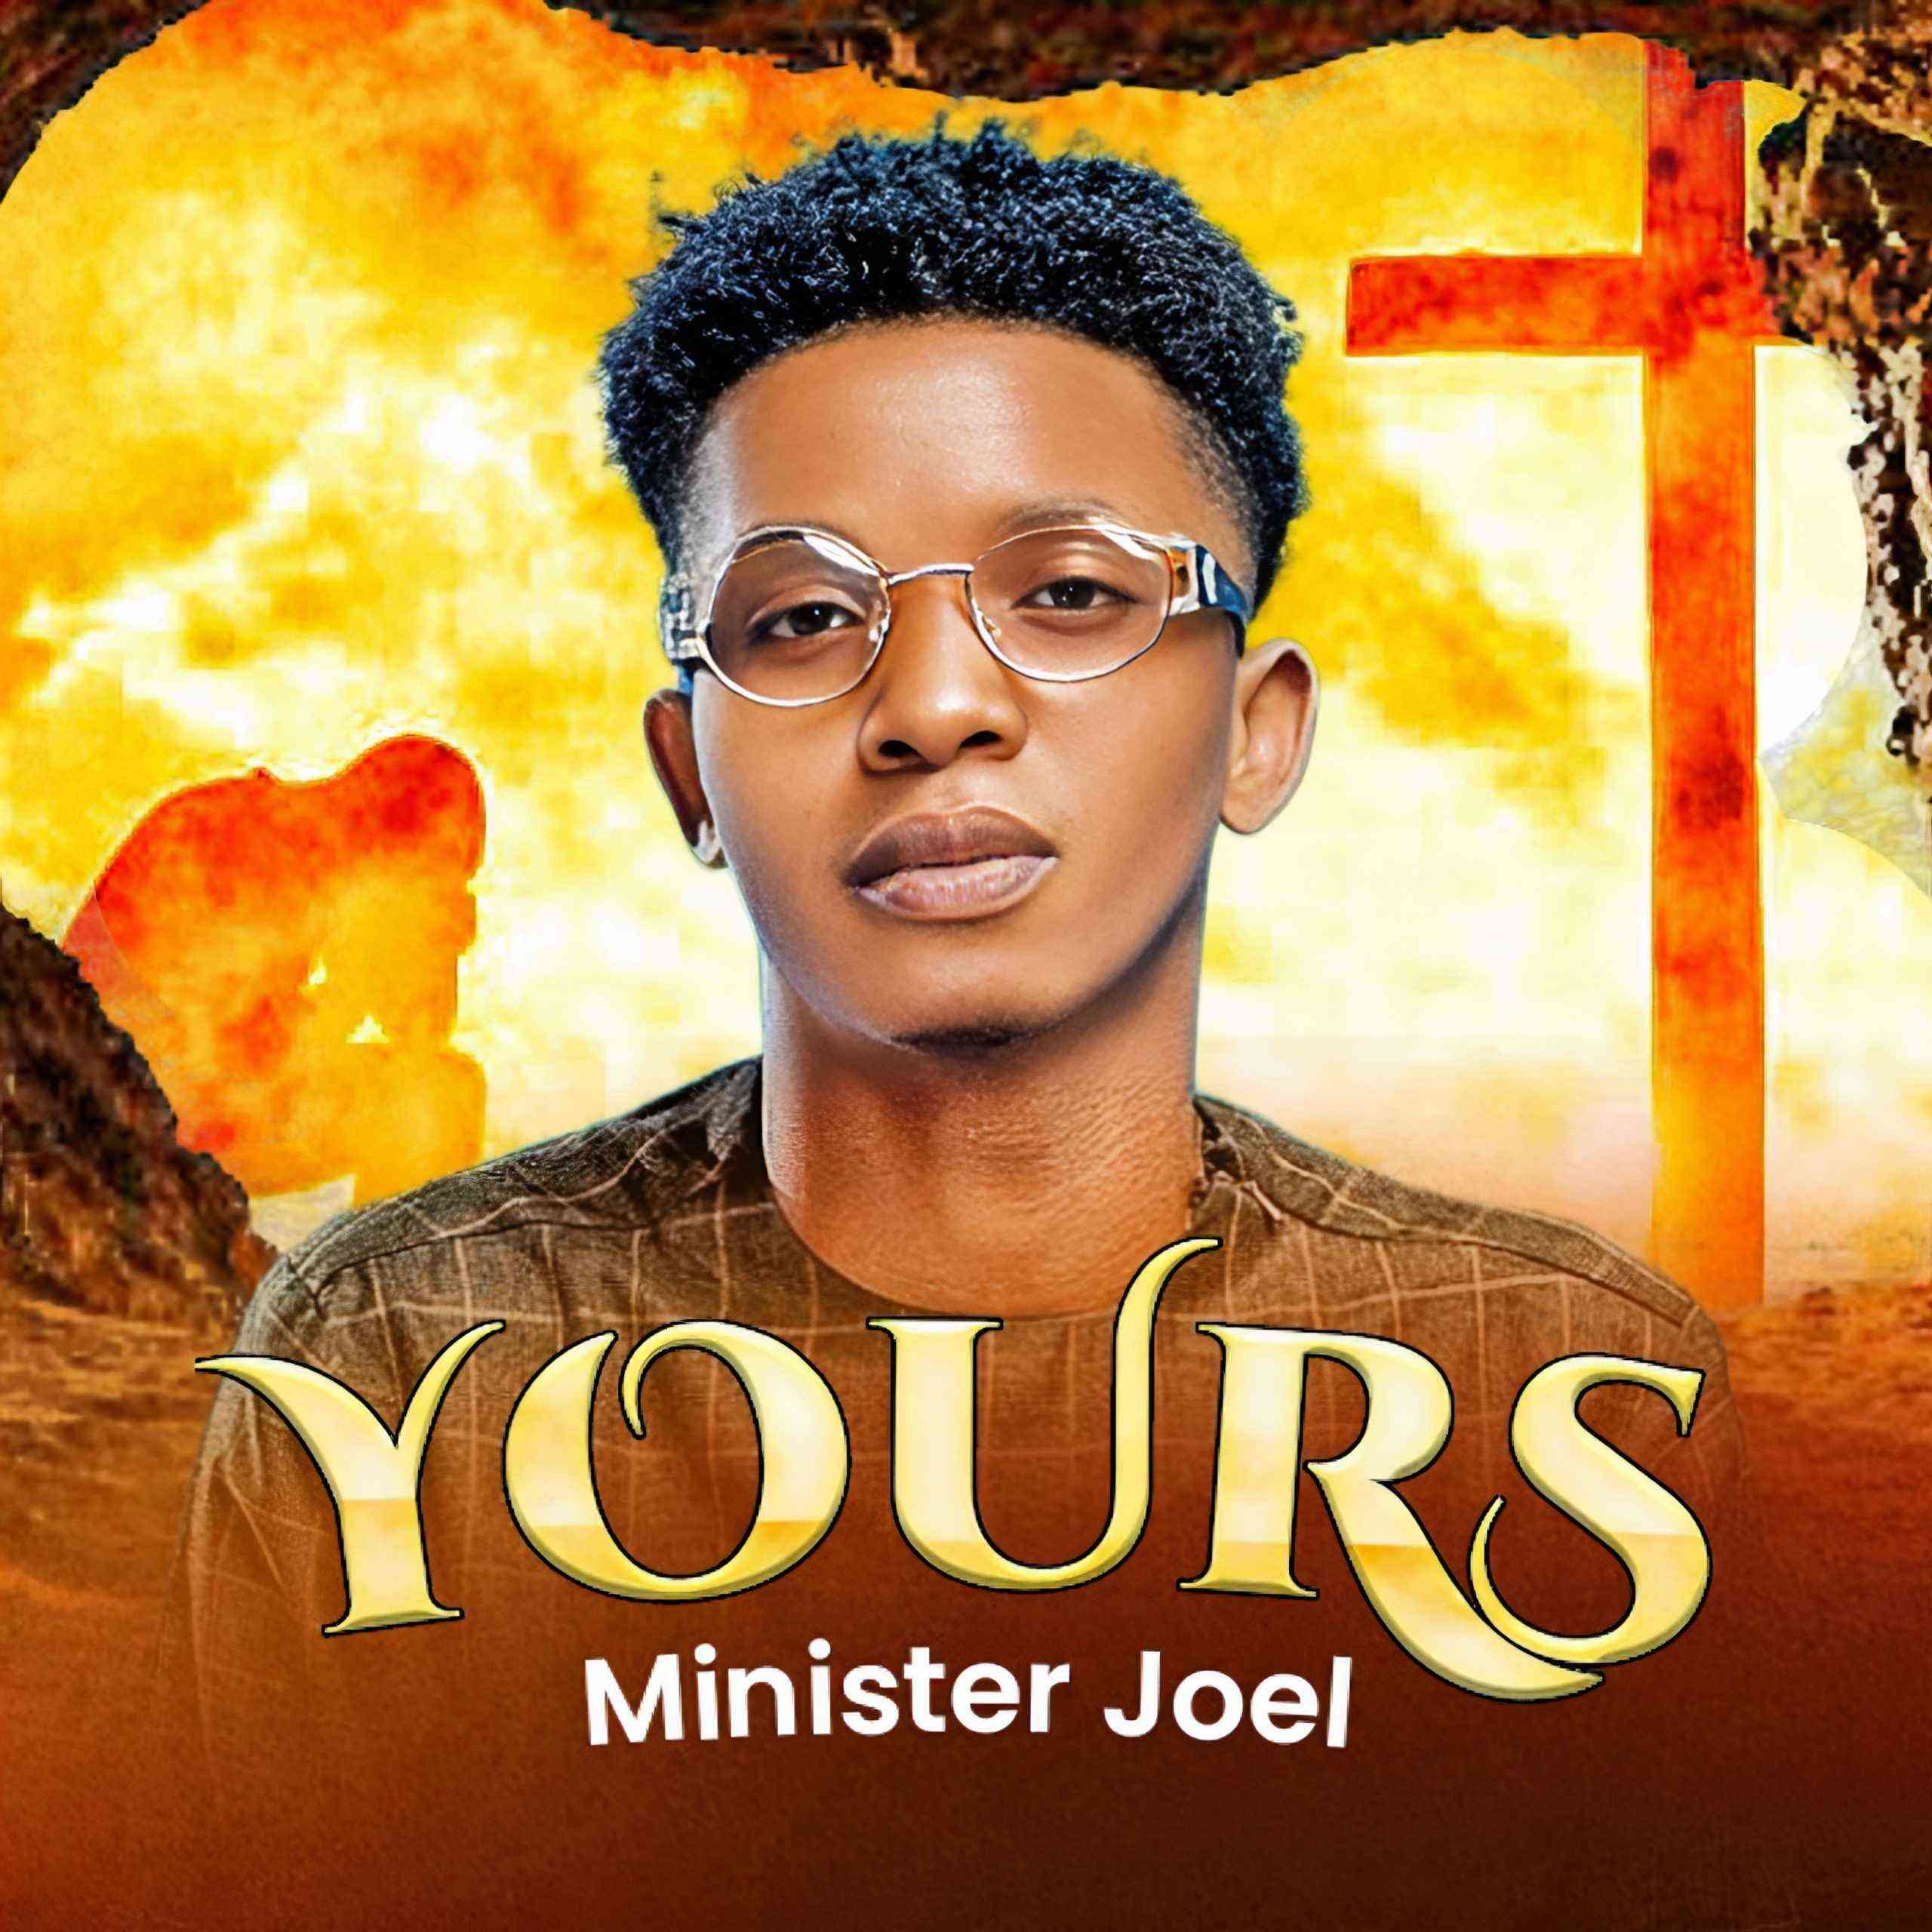 Download Mp3 Minister Joel Yours